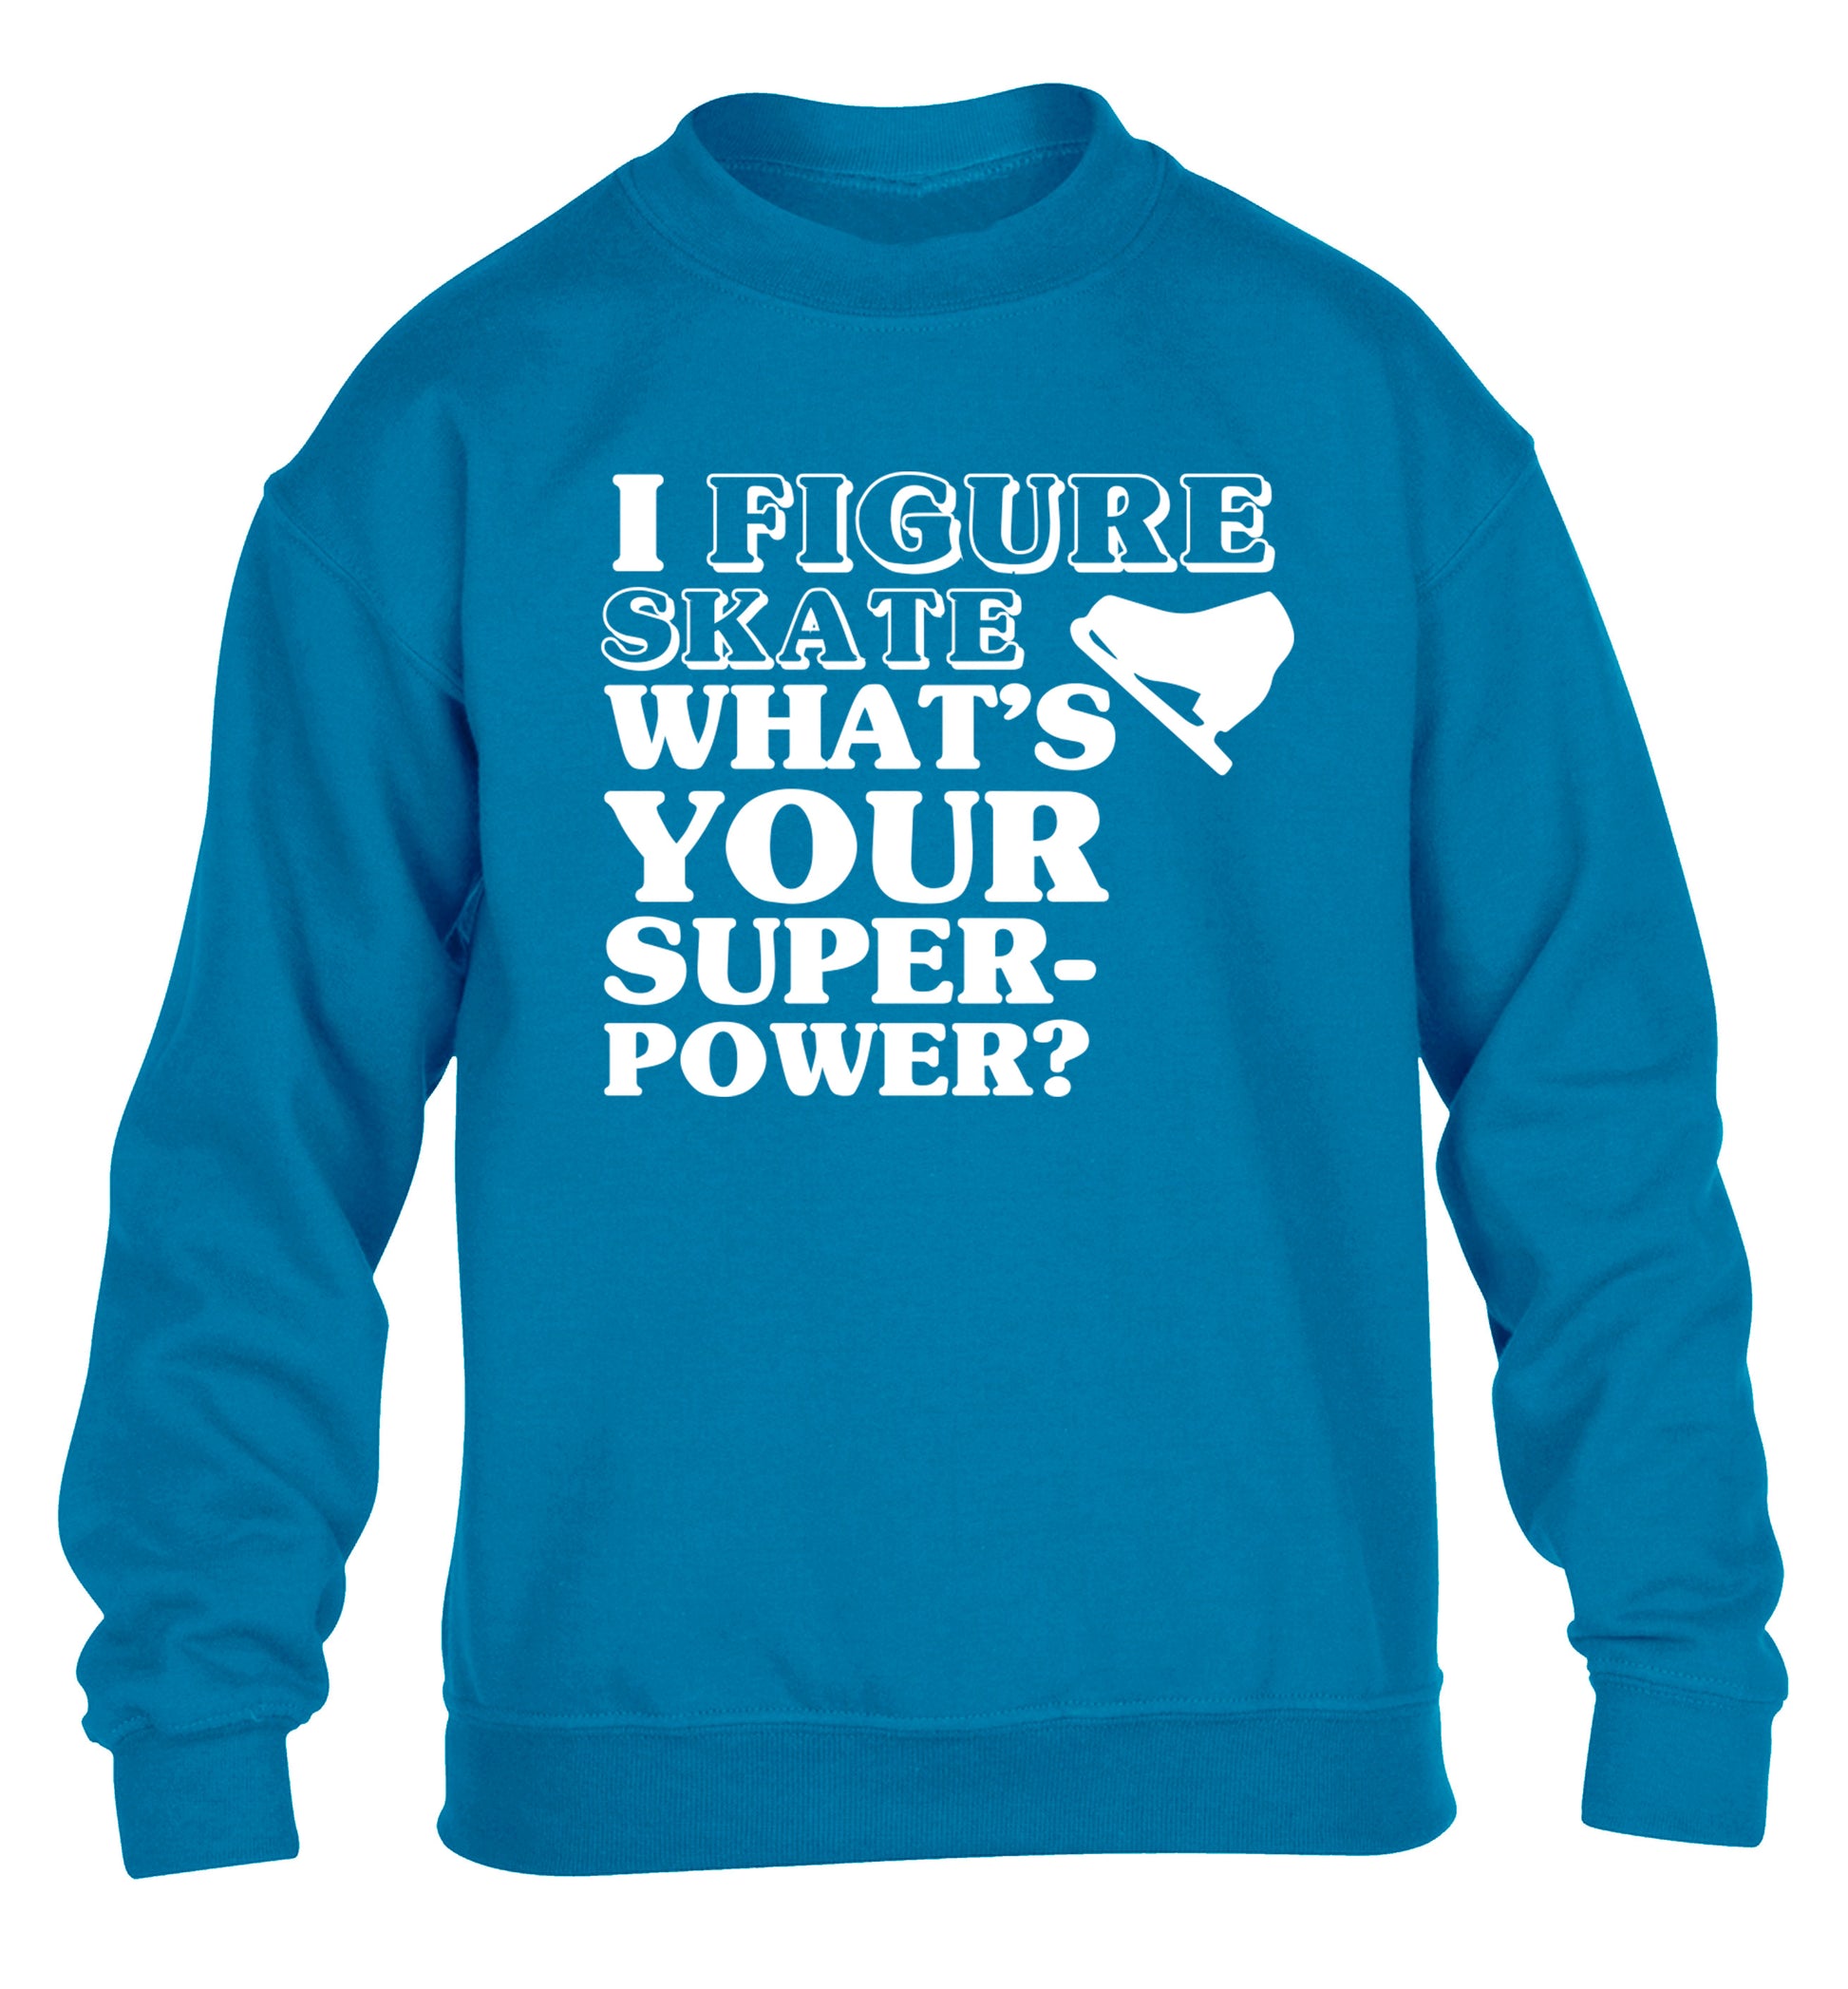 I figure skate what's your superpower? children's blue sweater 12-14 Years